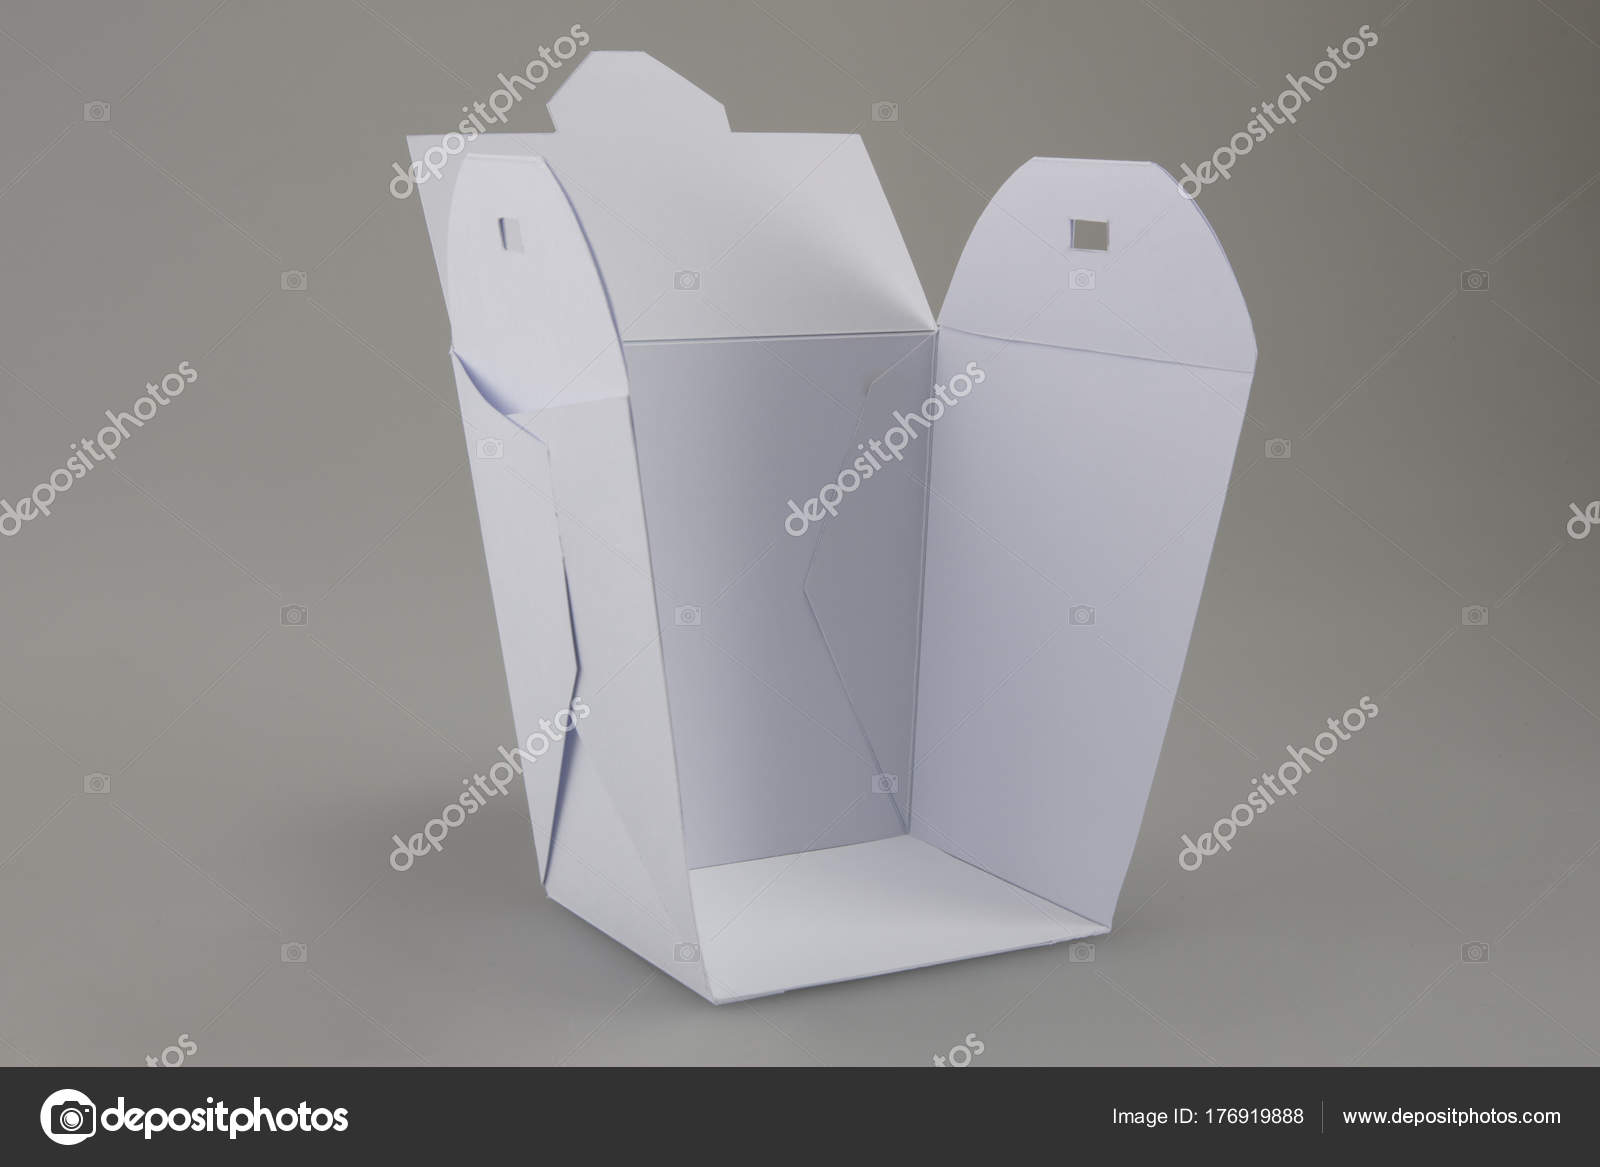 Download Mockup Wok Box Cut Out Part Show Contents Stock Photo Image By C Nechipas 176919888